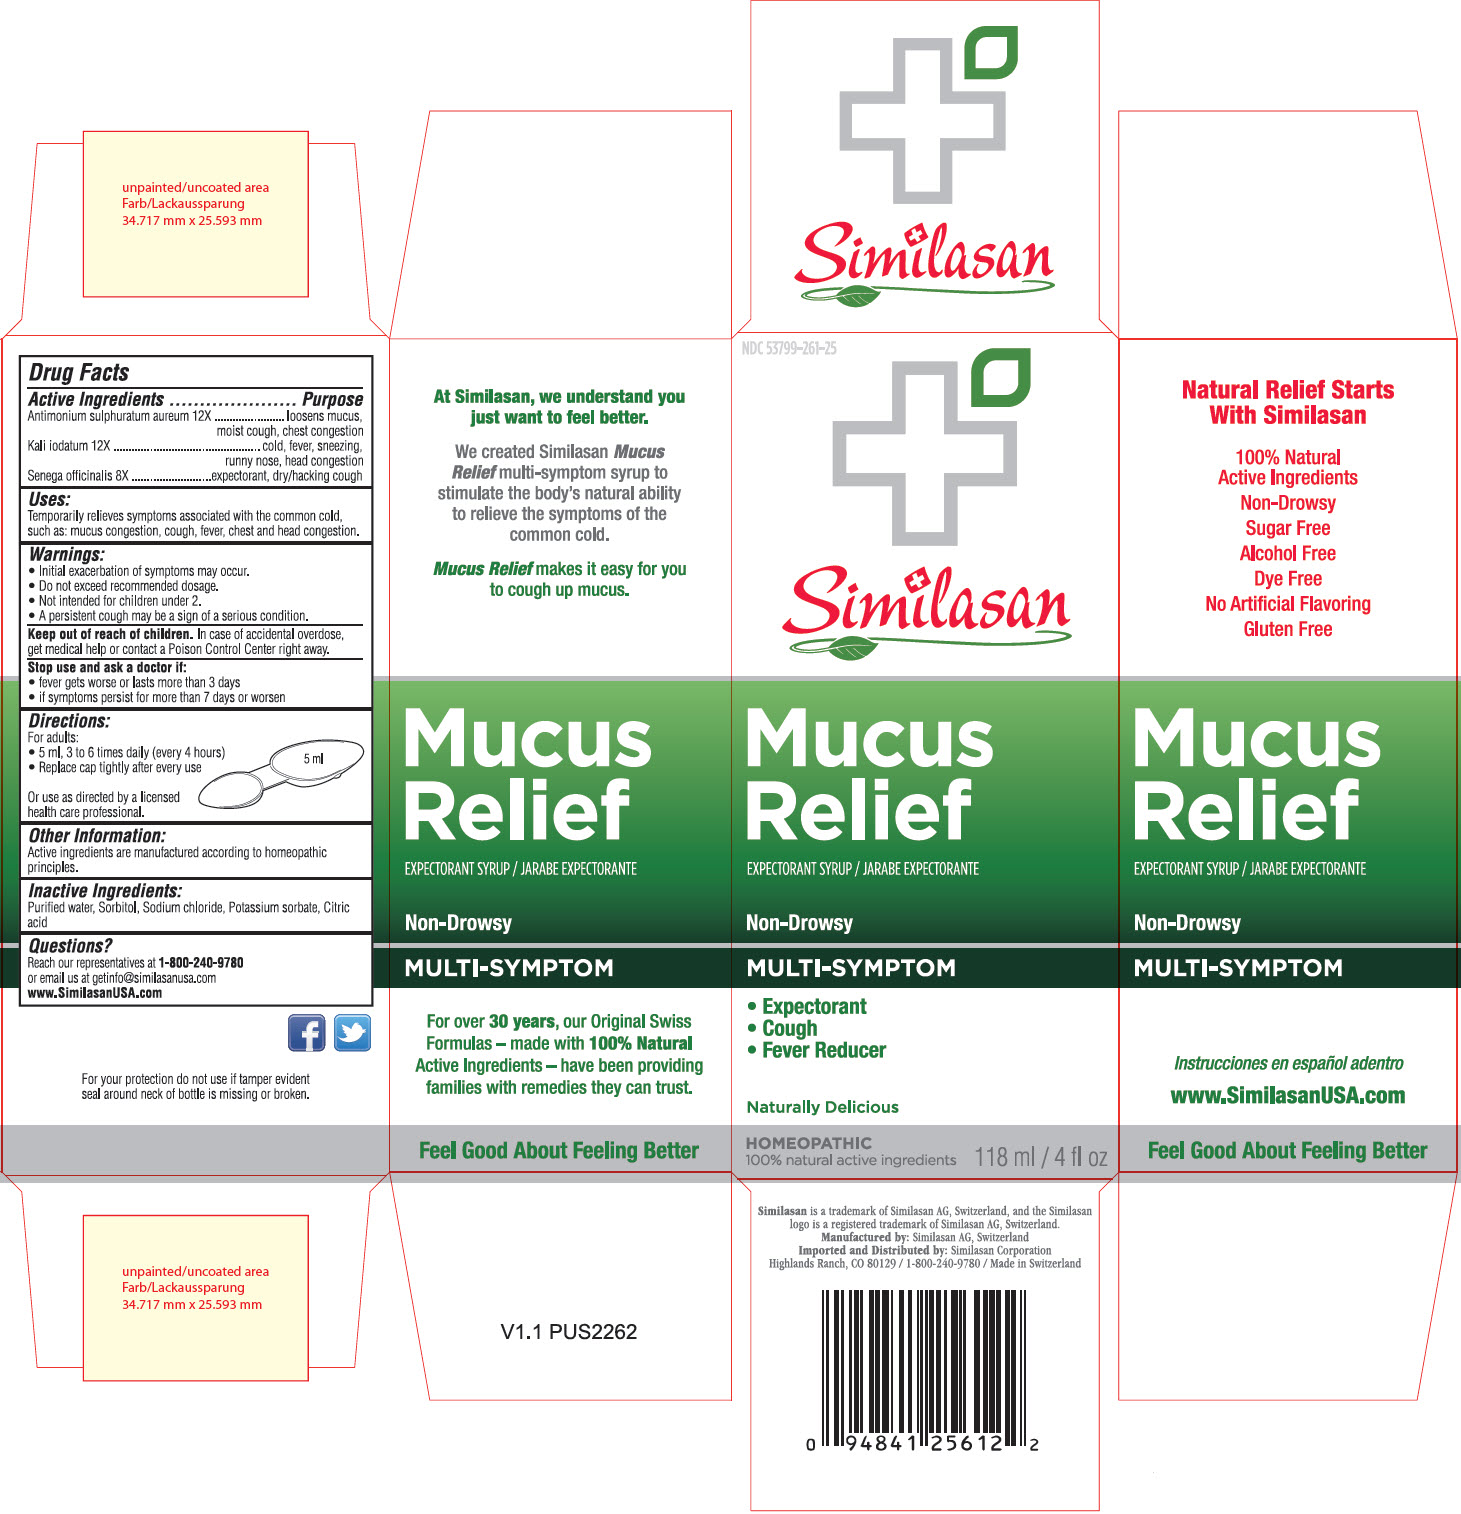 NDC 53799-261-25 Similasan Mucus Relief Expectorant Syrup / Jarabe Expectorante Non-Drowsy MULTI-SYMPTOM Expectorant Cough Fever Reducer Naturally Delicious HOMEOPATHIC 100% natural active ingredients 118ml / 4 fl oz